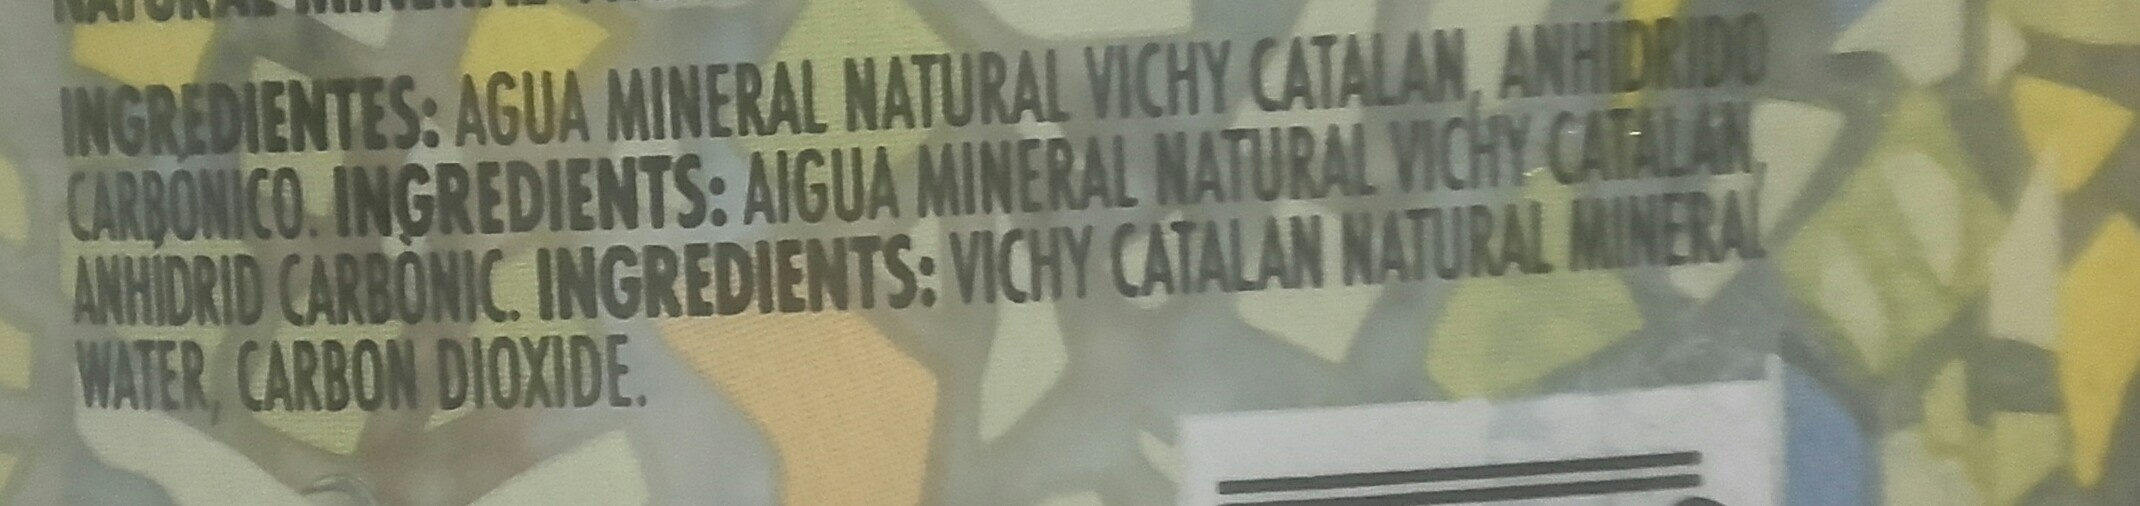 Agua mineral natural con gas - Ingredientes